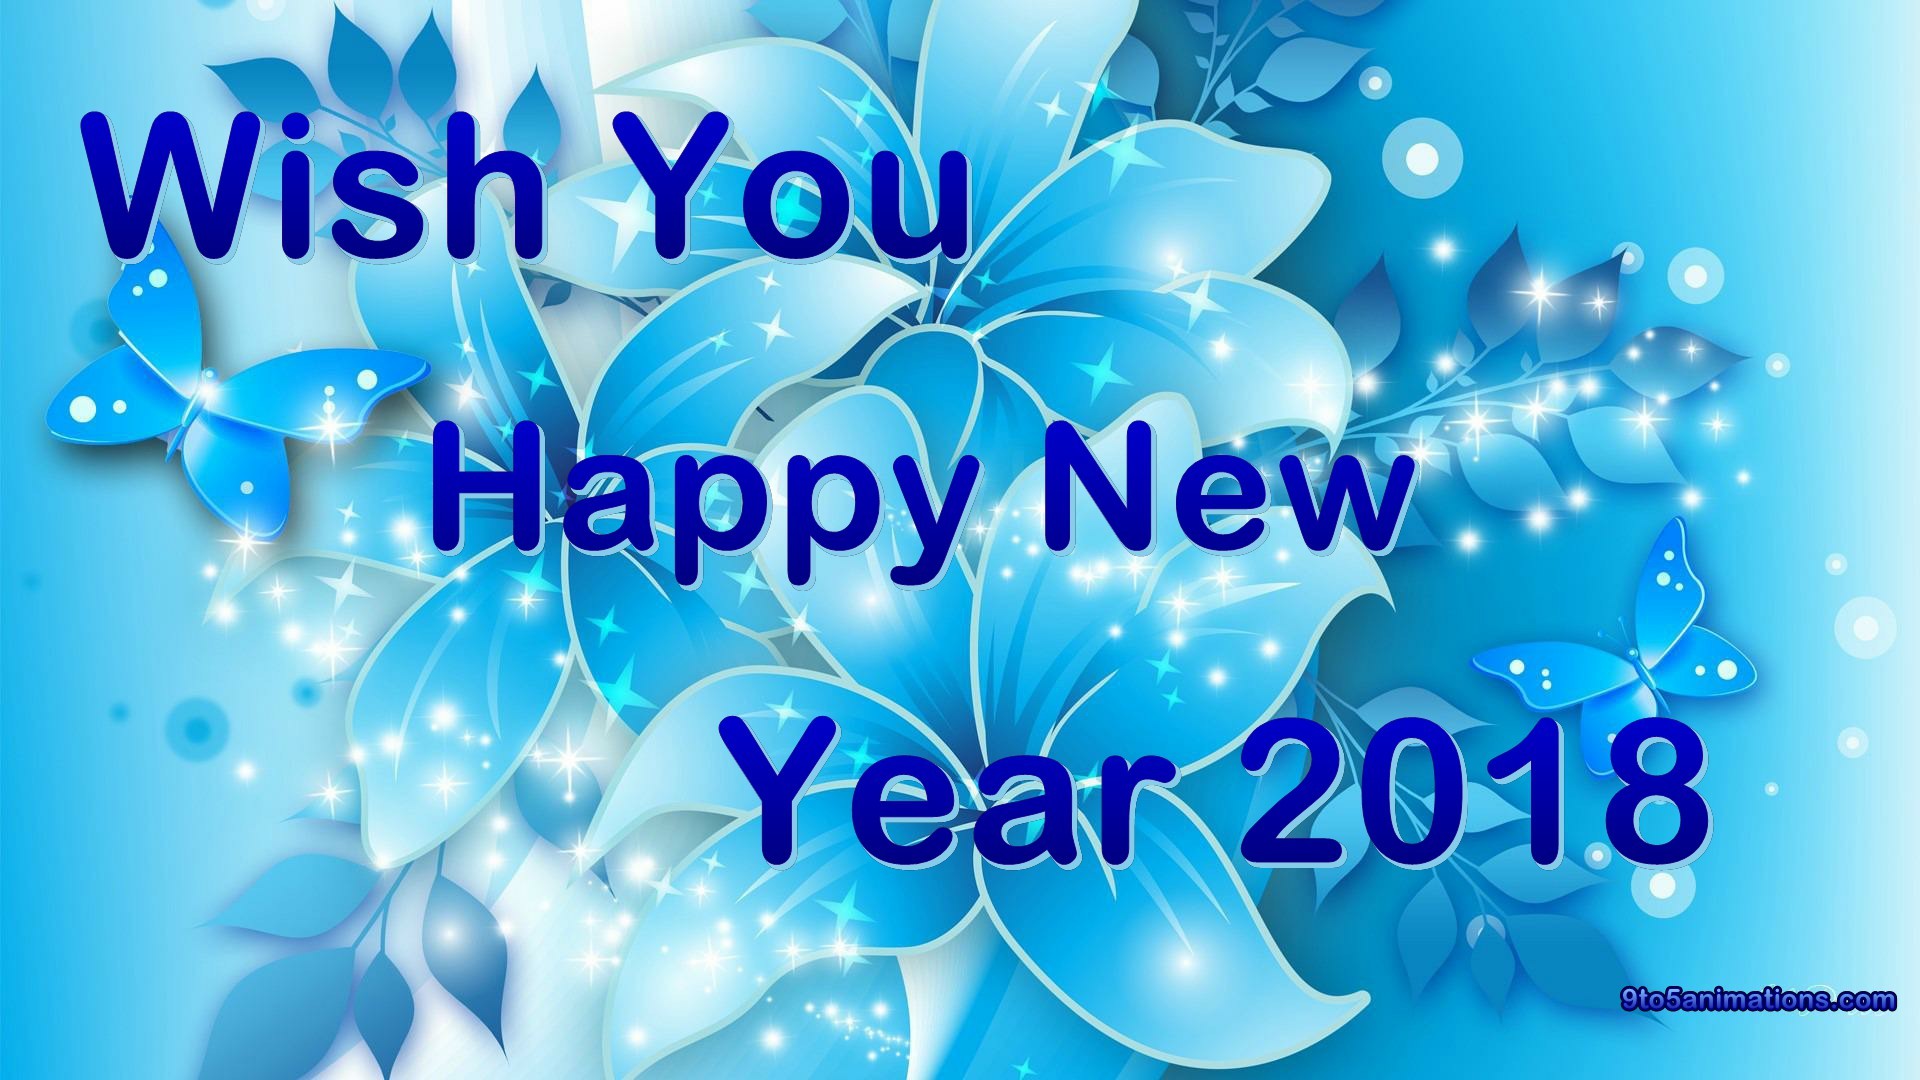 1920x1080 happy new year wishes with blue backgrounds HD wallpapers free